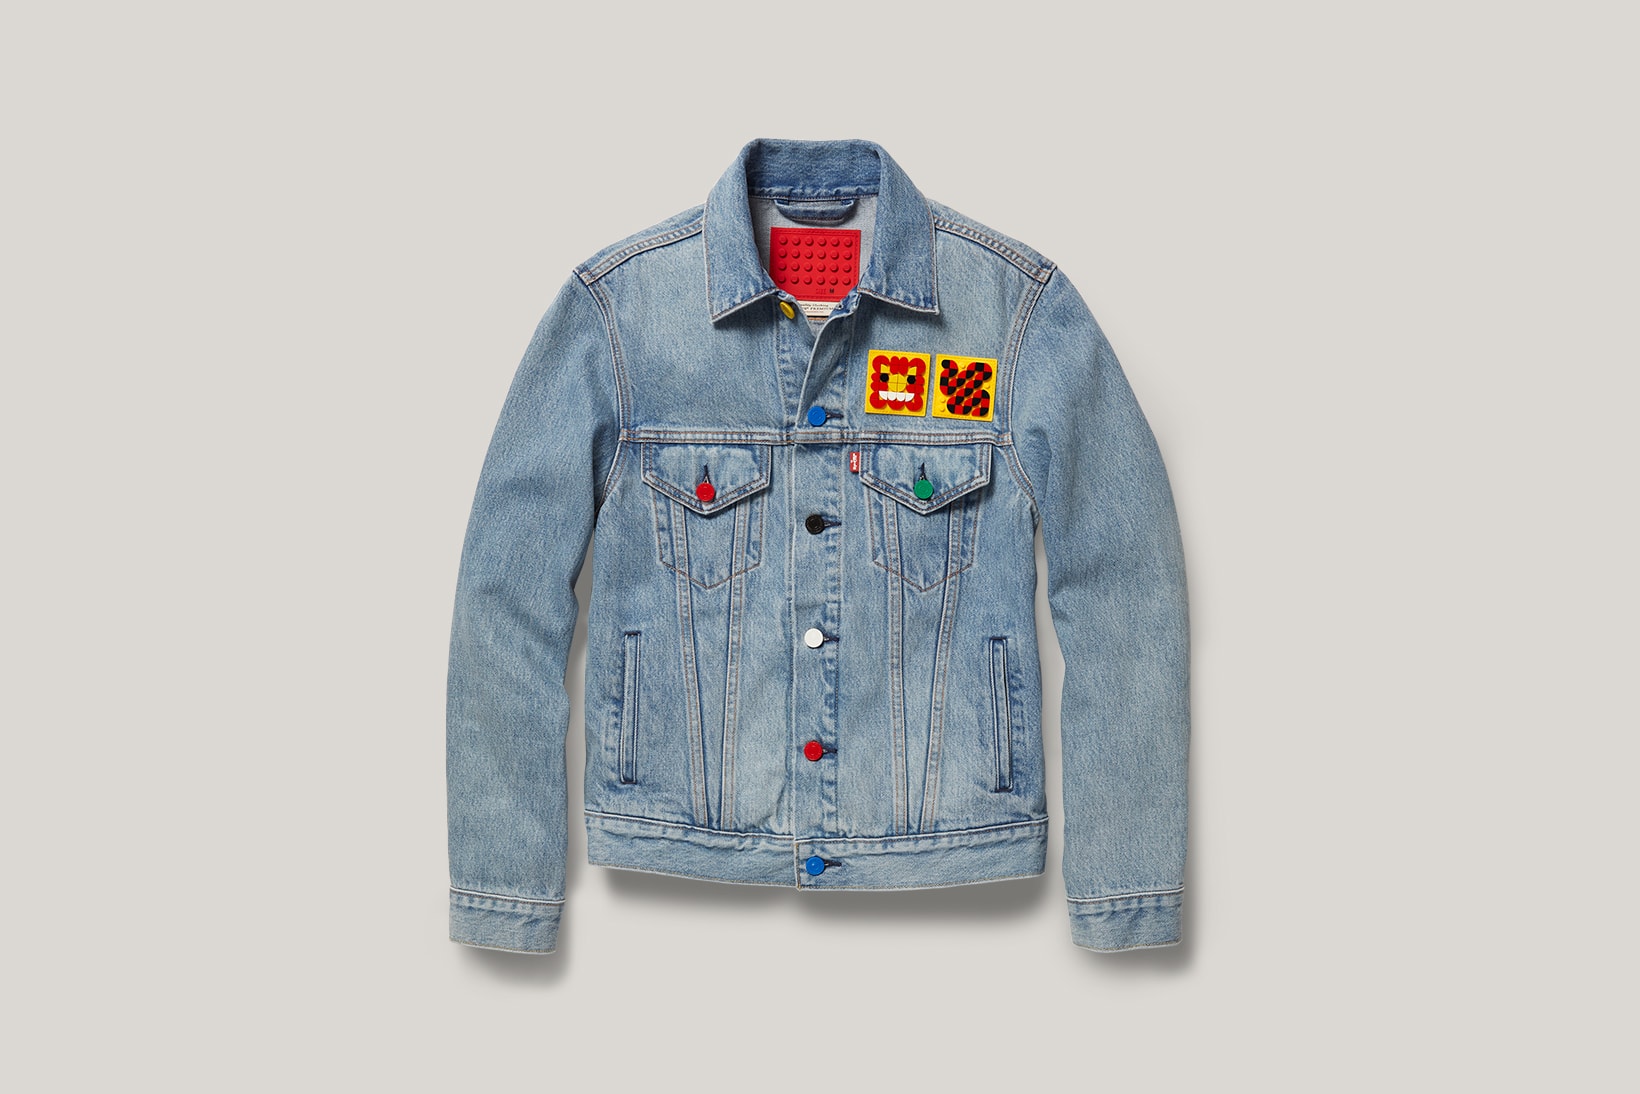 levis lego collaboration outerwear jackets hoodies tees baseplates